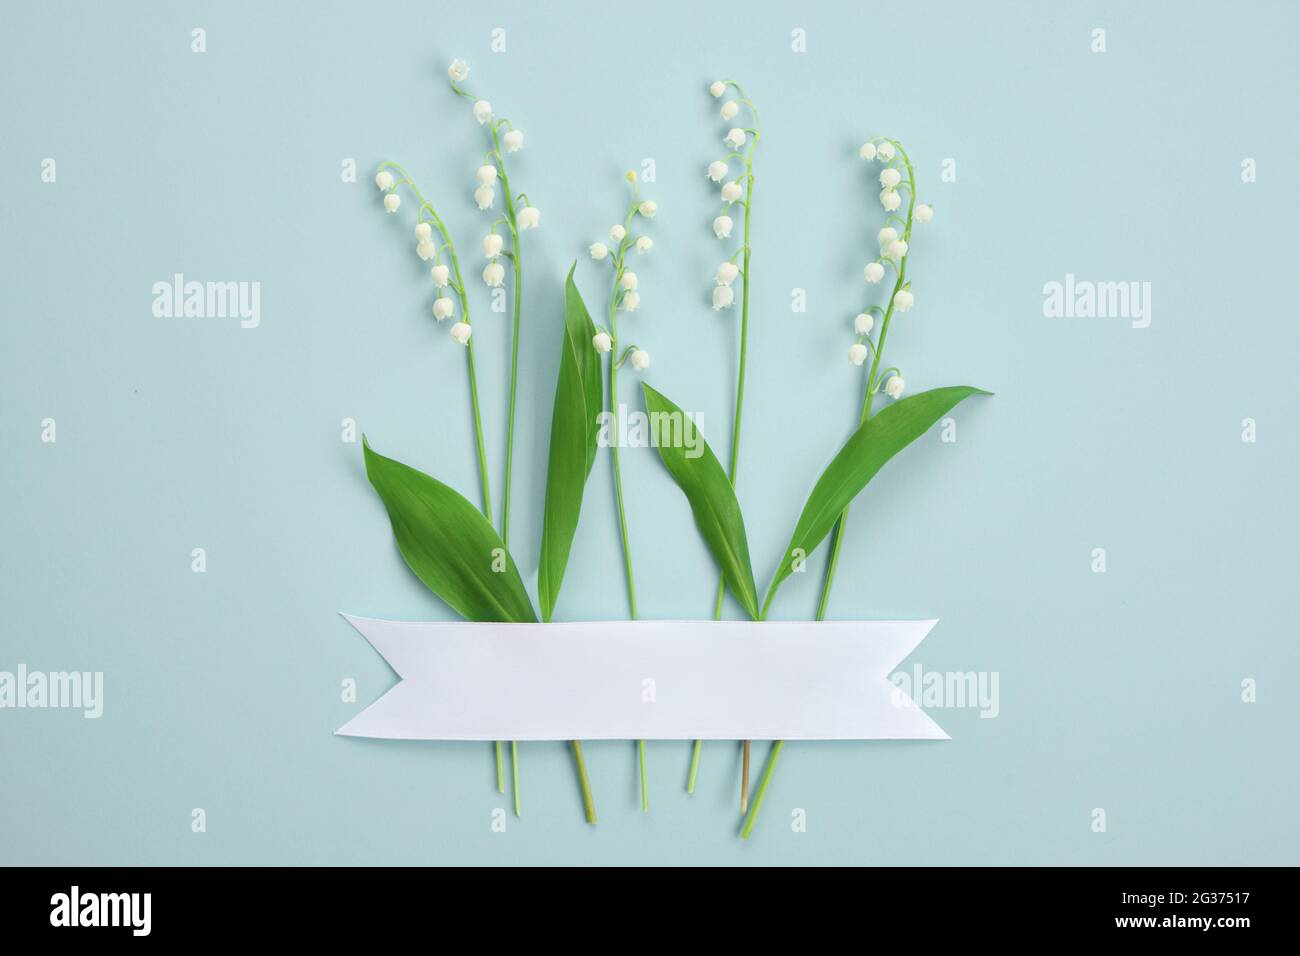 Composition with white flowers. Creative layout of lilies of the valley on a light green background. Minimalism concept. Stock Photo